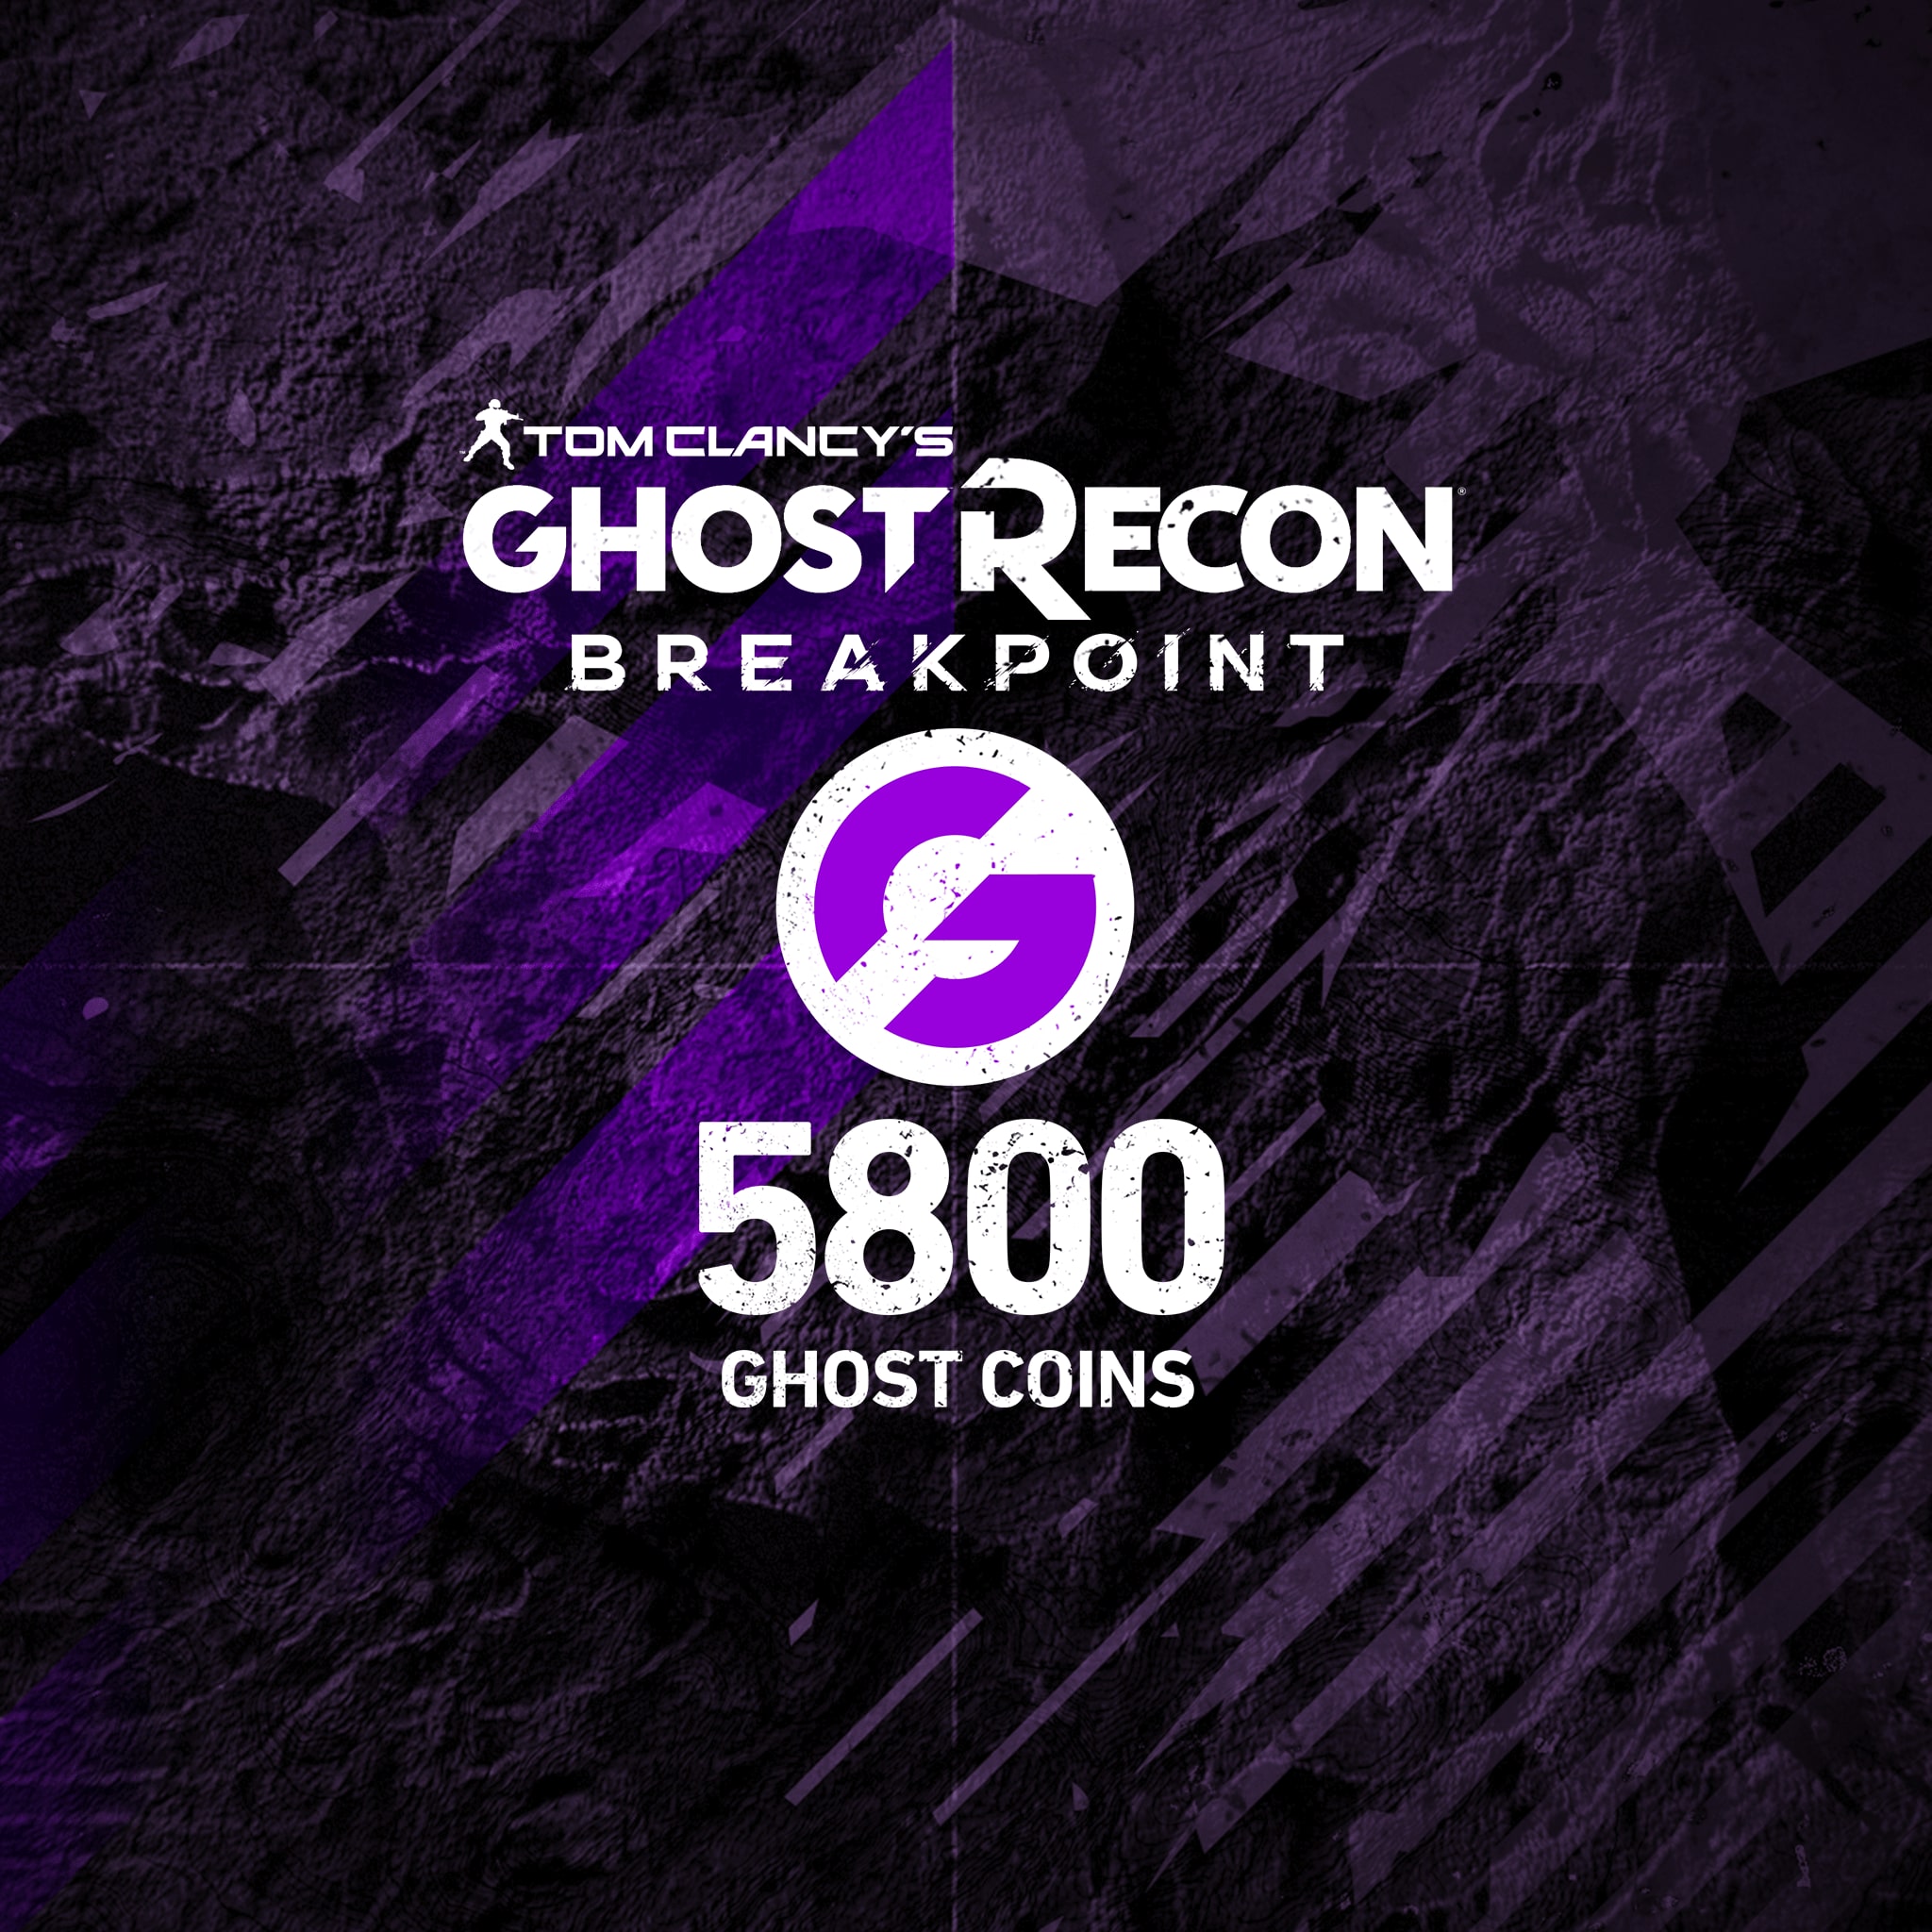 Ghost Recon Breakpoint - 4800 (+1000) Ghost Coins